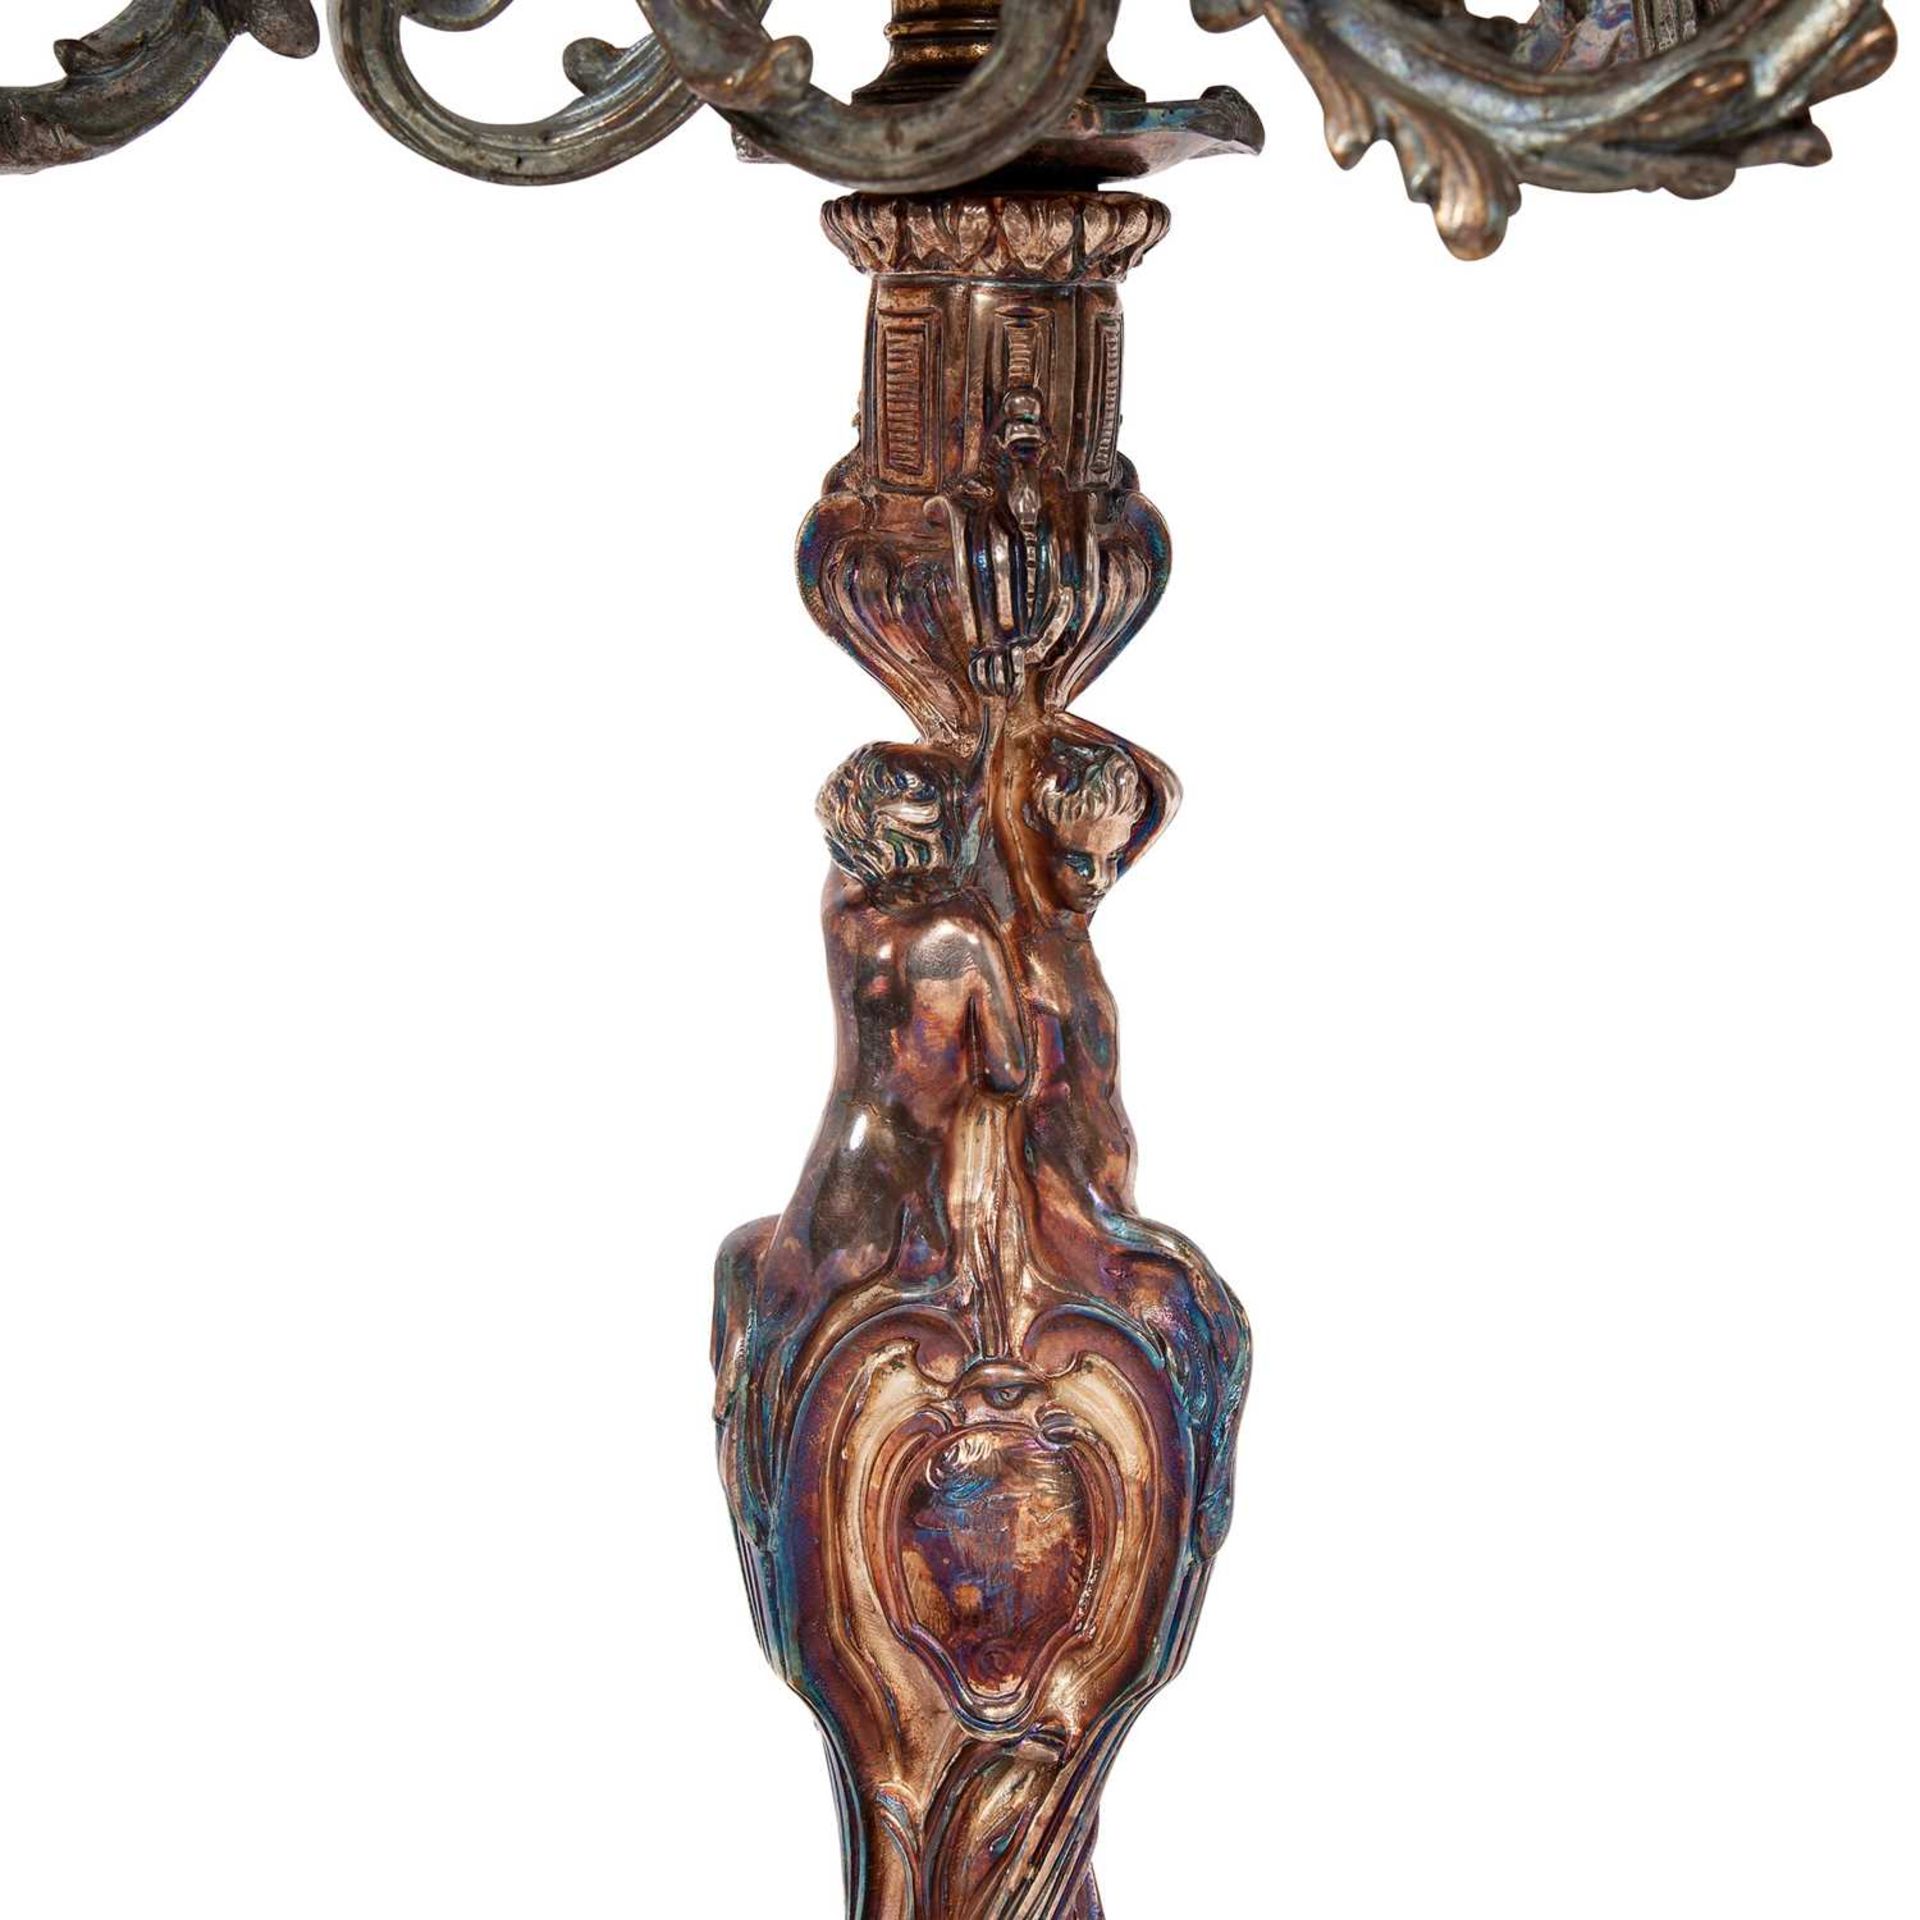 AFTER JUSTE-AURELE MEISSONNIER (1695-1750): A PAIR OF 19TH CENTURY SILVERED BRONZE CANDELABRA - Image 3 of 3